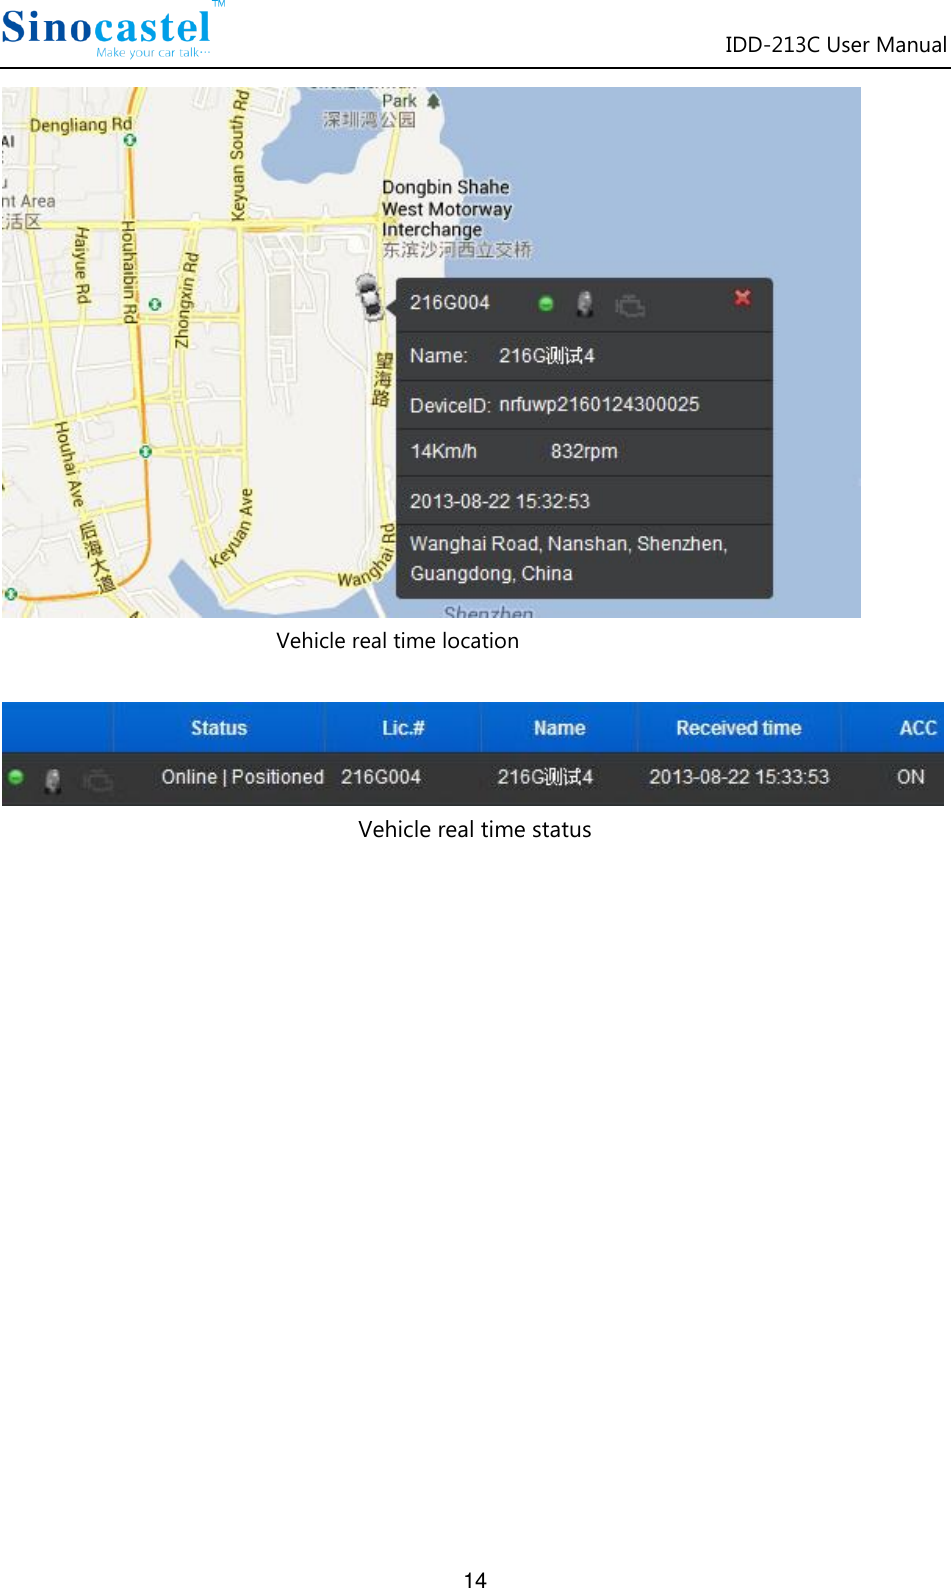 IDD-213C User Manual 14  Vehicle real time location   Vehicle real time status                 